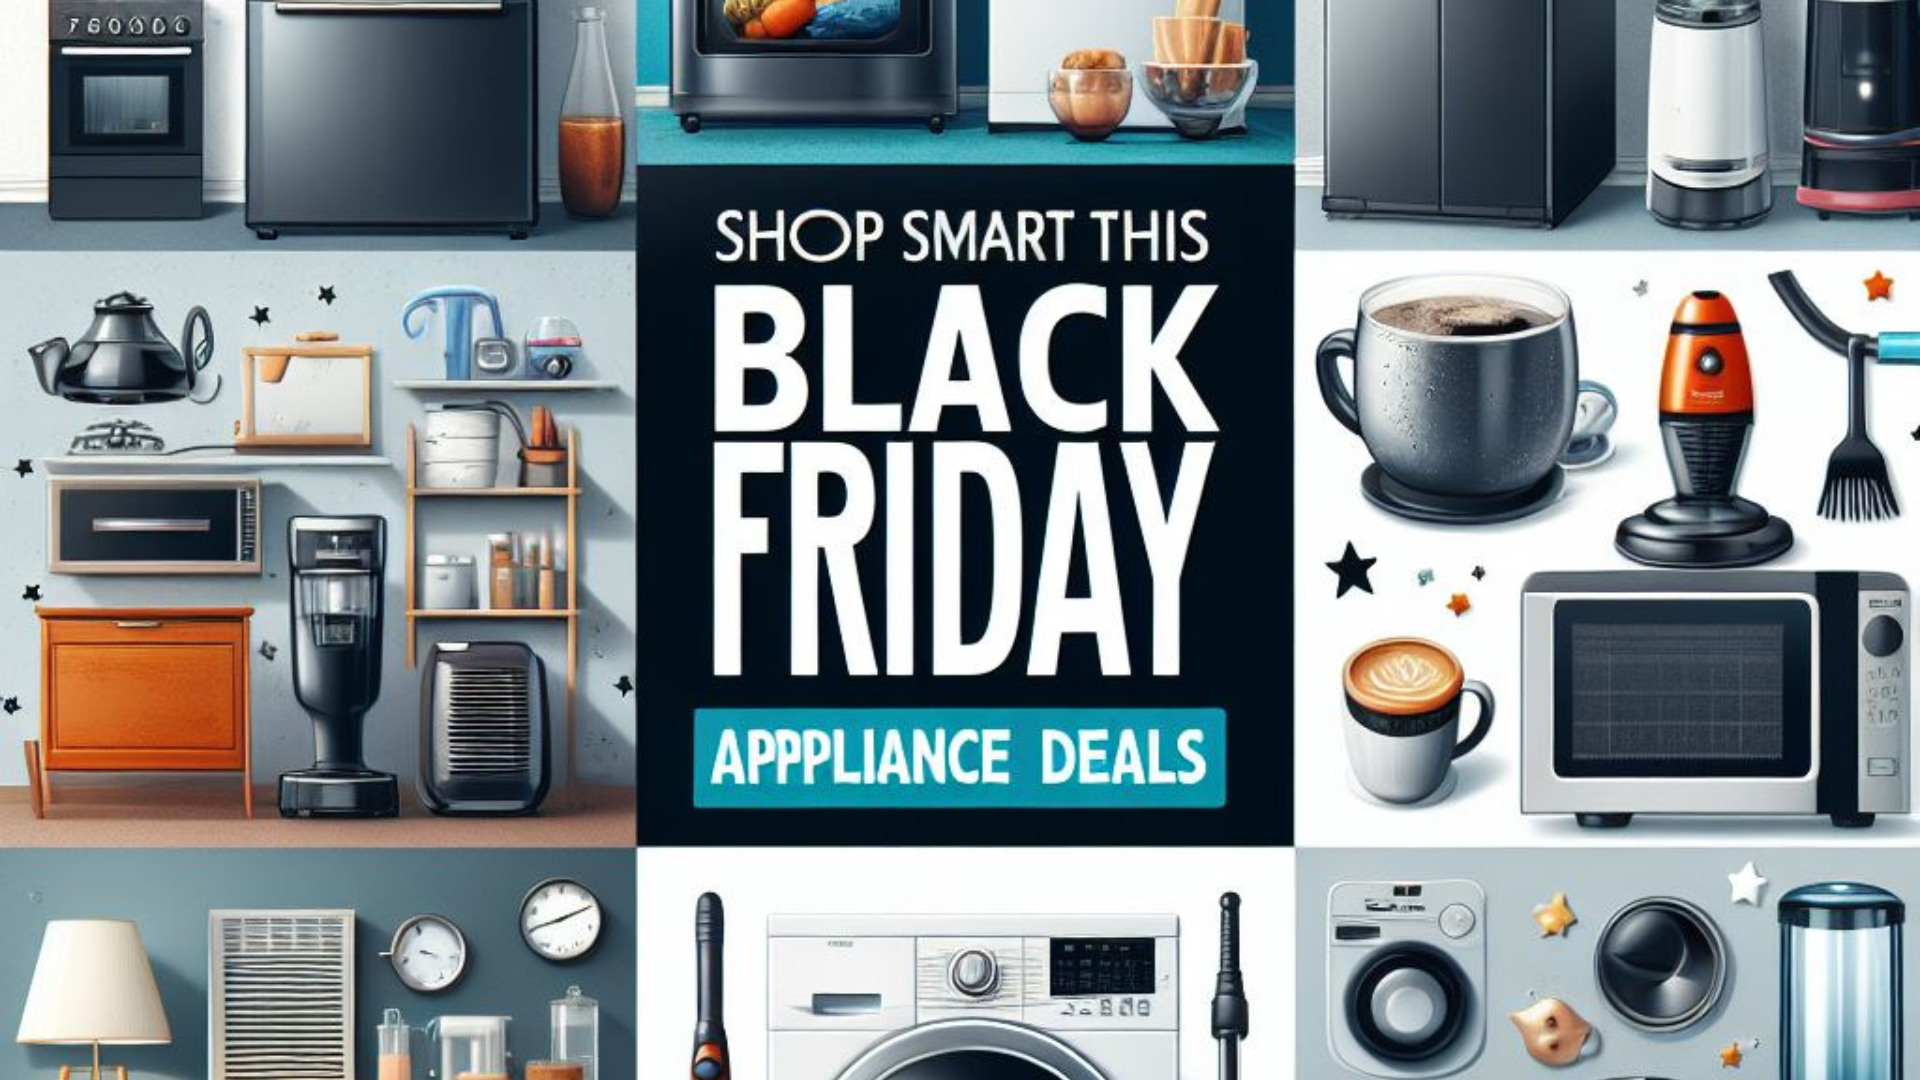 Discover early Black Friday appliance deals for home essentials like toasters, coffee makers, vacuums, and air purifiers. Shop smart!